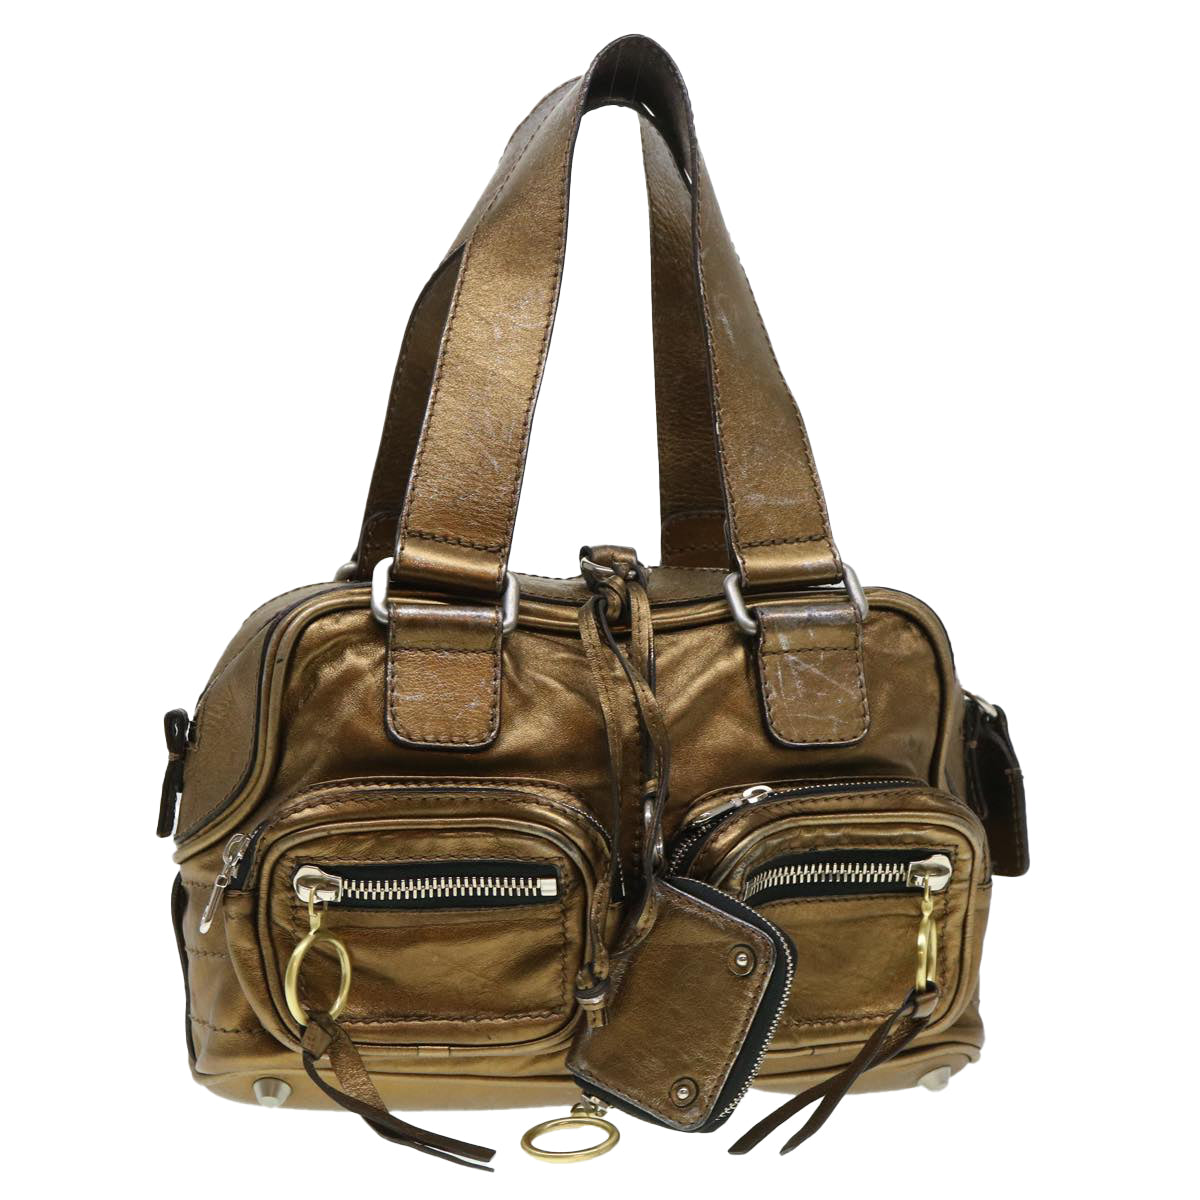 Chloe Hand Bag Leather Gold 6HS184-50 Auth bs4554